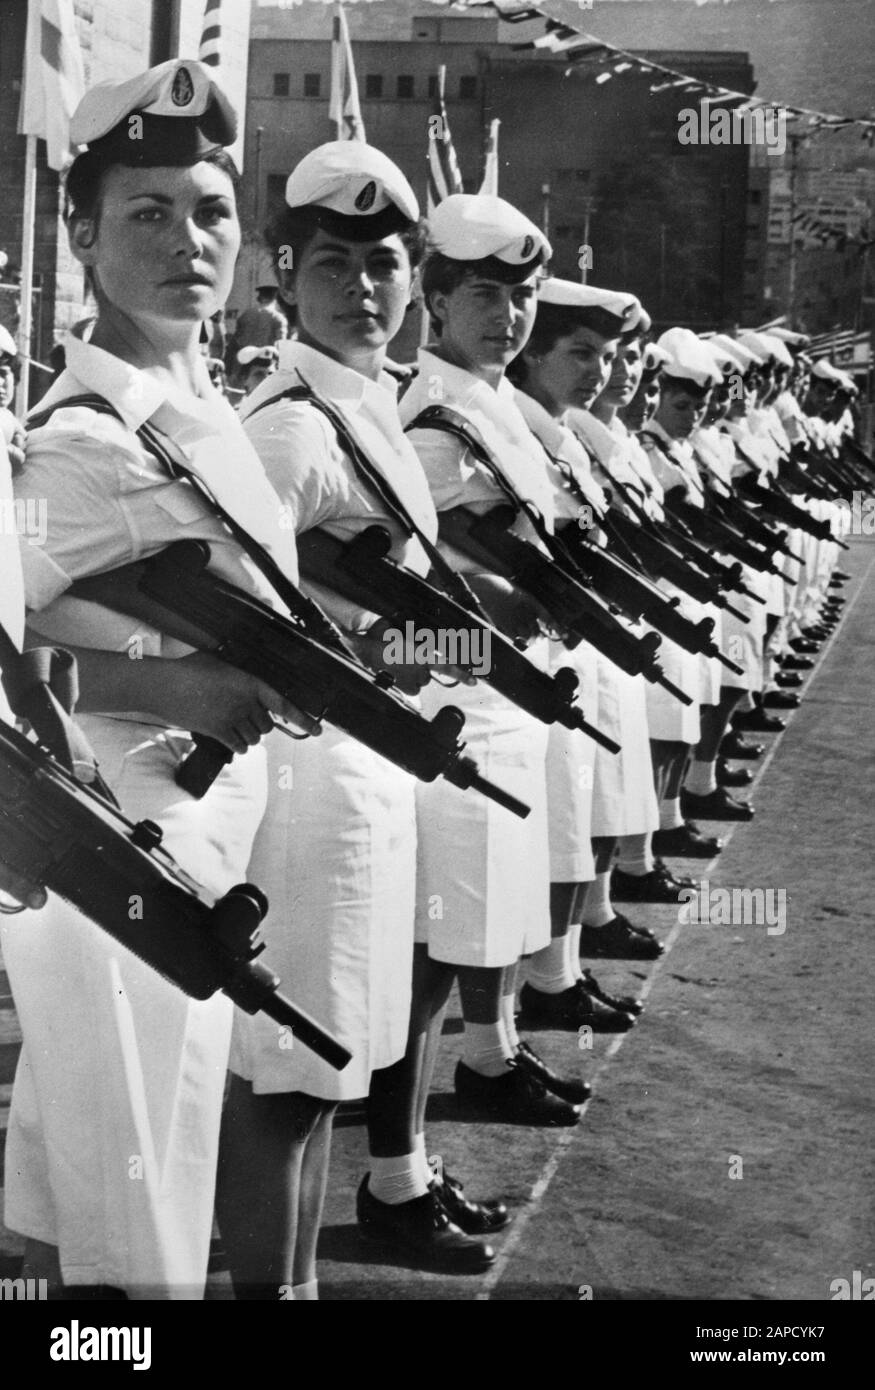 Department of Israeli female marines with automatic firearms prepared during a parade Date: undated Location: Israel Keywords: Marines, military parades, military, uniforms, women, firearms Stock Photo